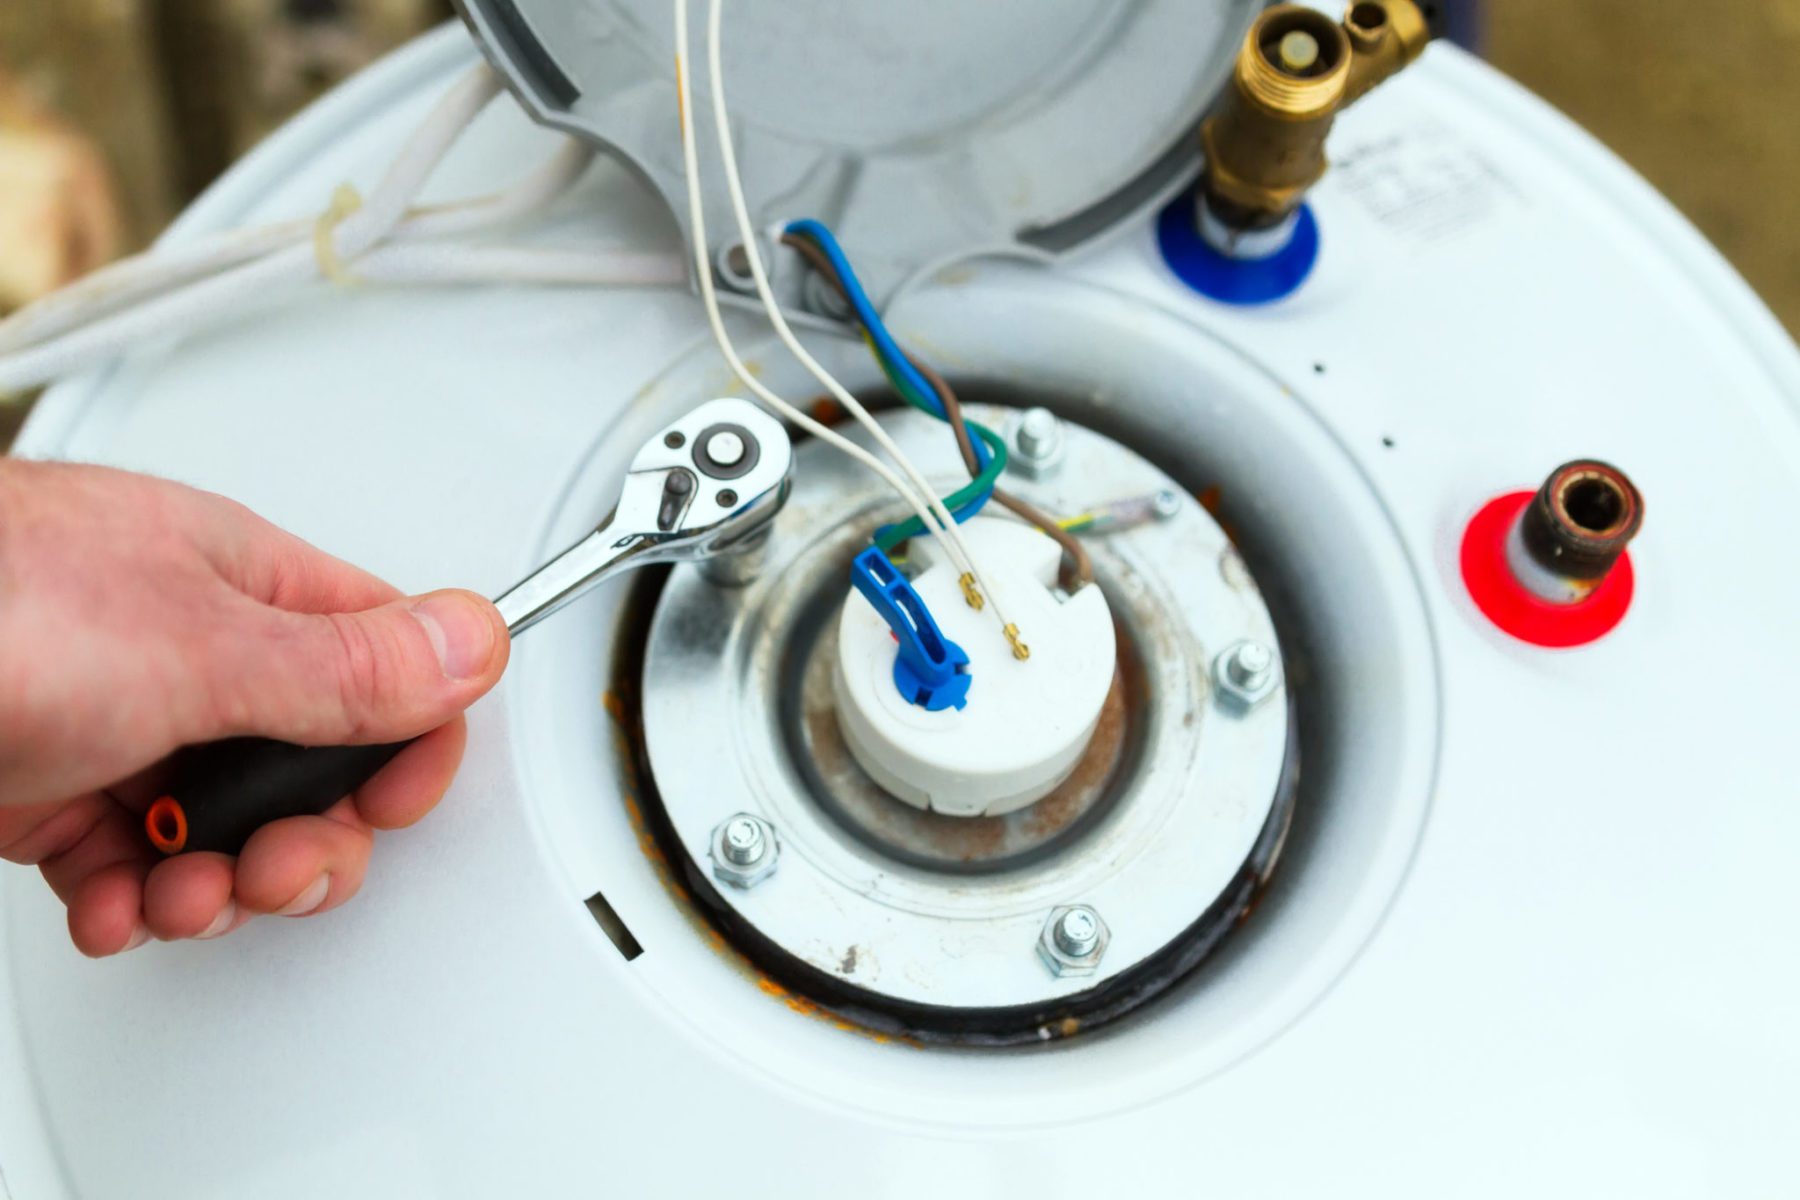 WHAT IS A WATER HEATER ANODE ROD AND WHEN SHOULD I REPLACE IT?